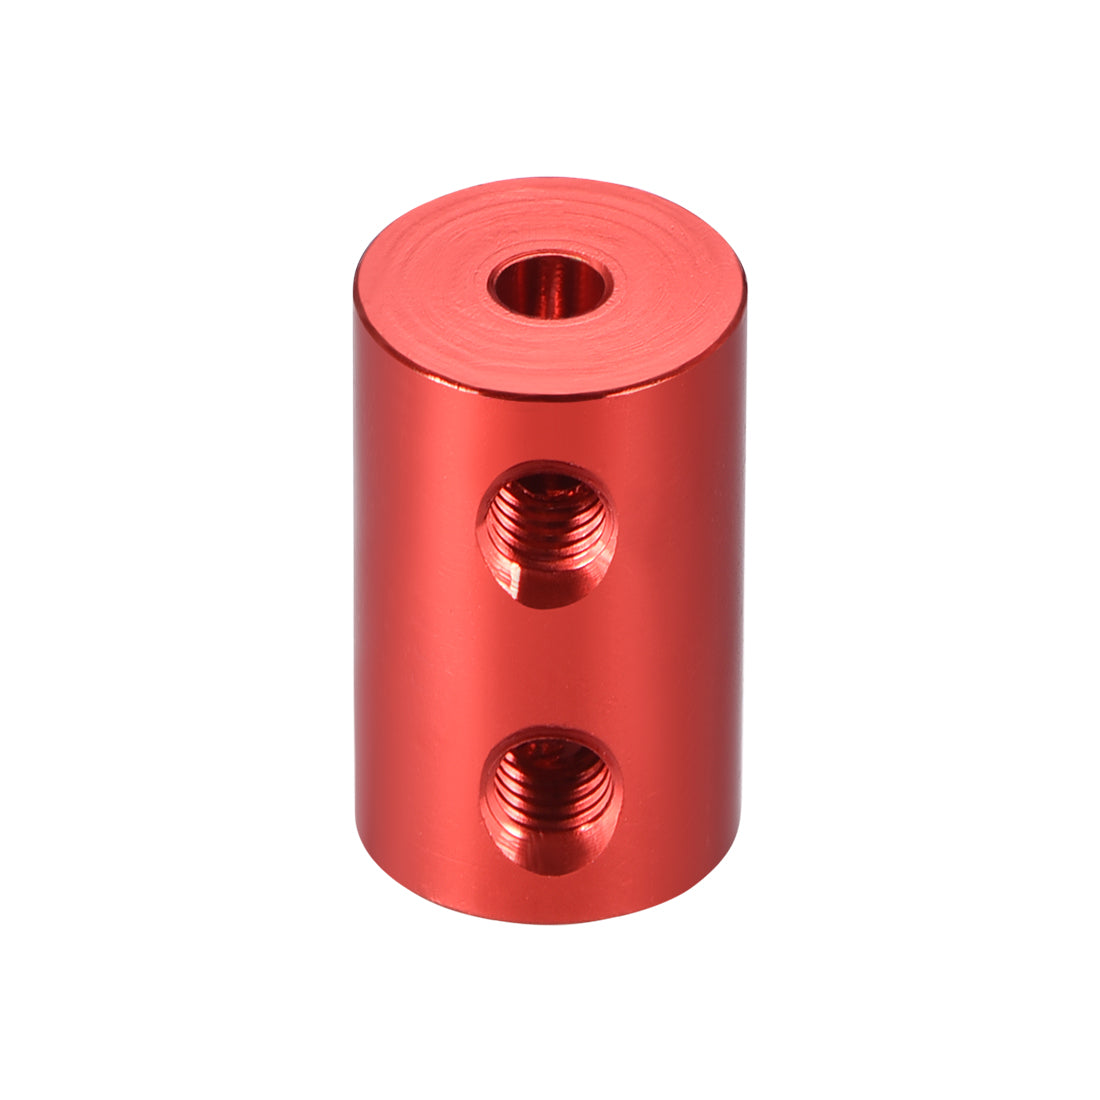 uxcell Uxcell Shaft Coupling 3.17mm to 5mm Bore L20xD12 Robot Motor Wheel Rigid Coupler Red